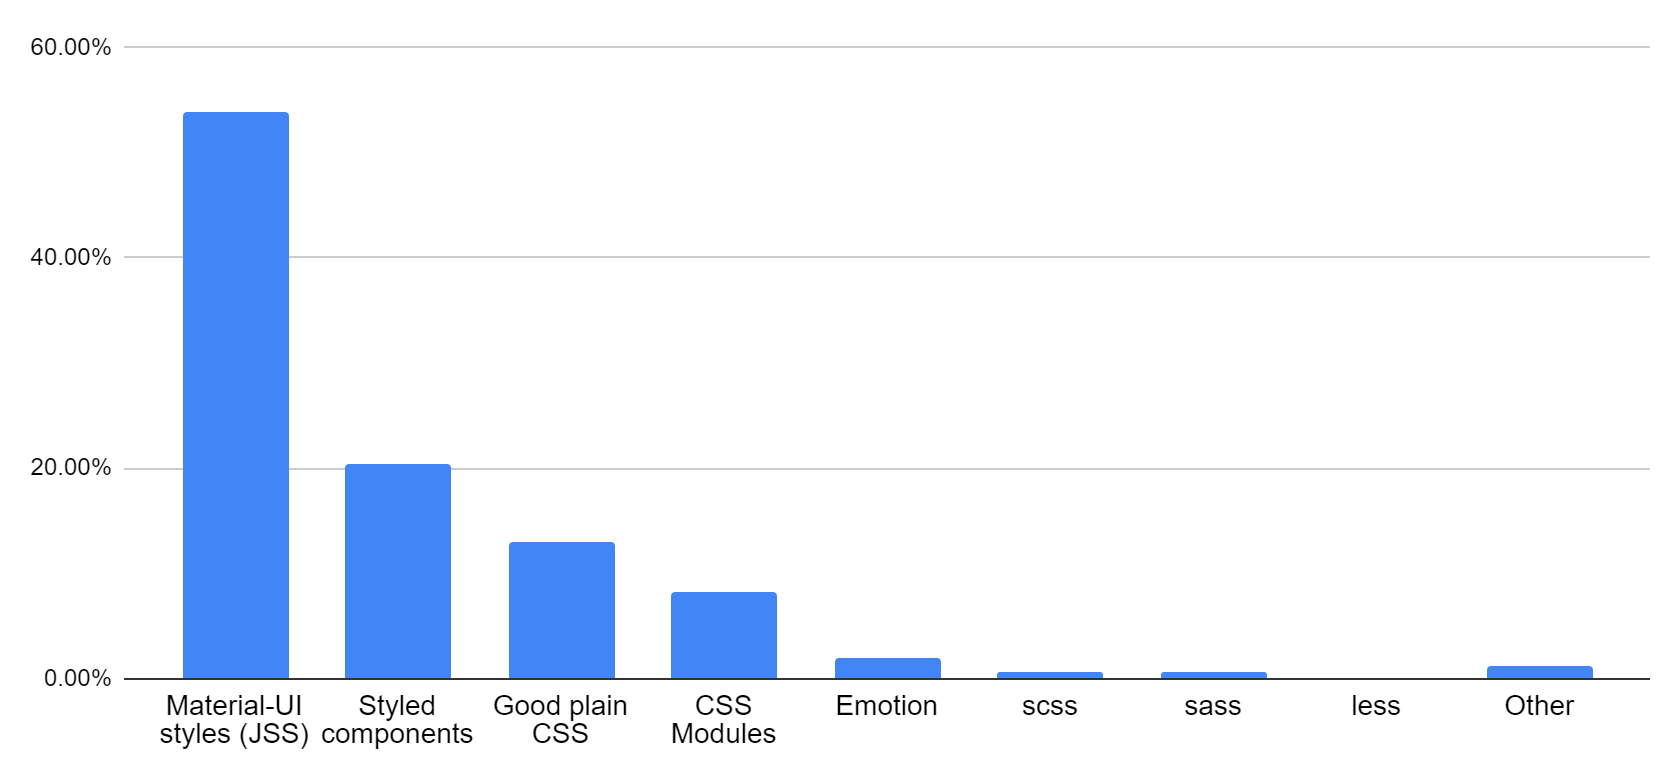 Pie chart: 53.84%    MUI styles (JSS), 20.41%    Styled components, 13.01%    Good plain CSS, 8.31%    CSS Modules, 1.96%    Emotion, 0.59%    scss, 0.59%    sass, 0.09%    less, 1.19%    Other